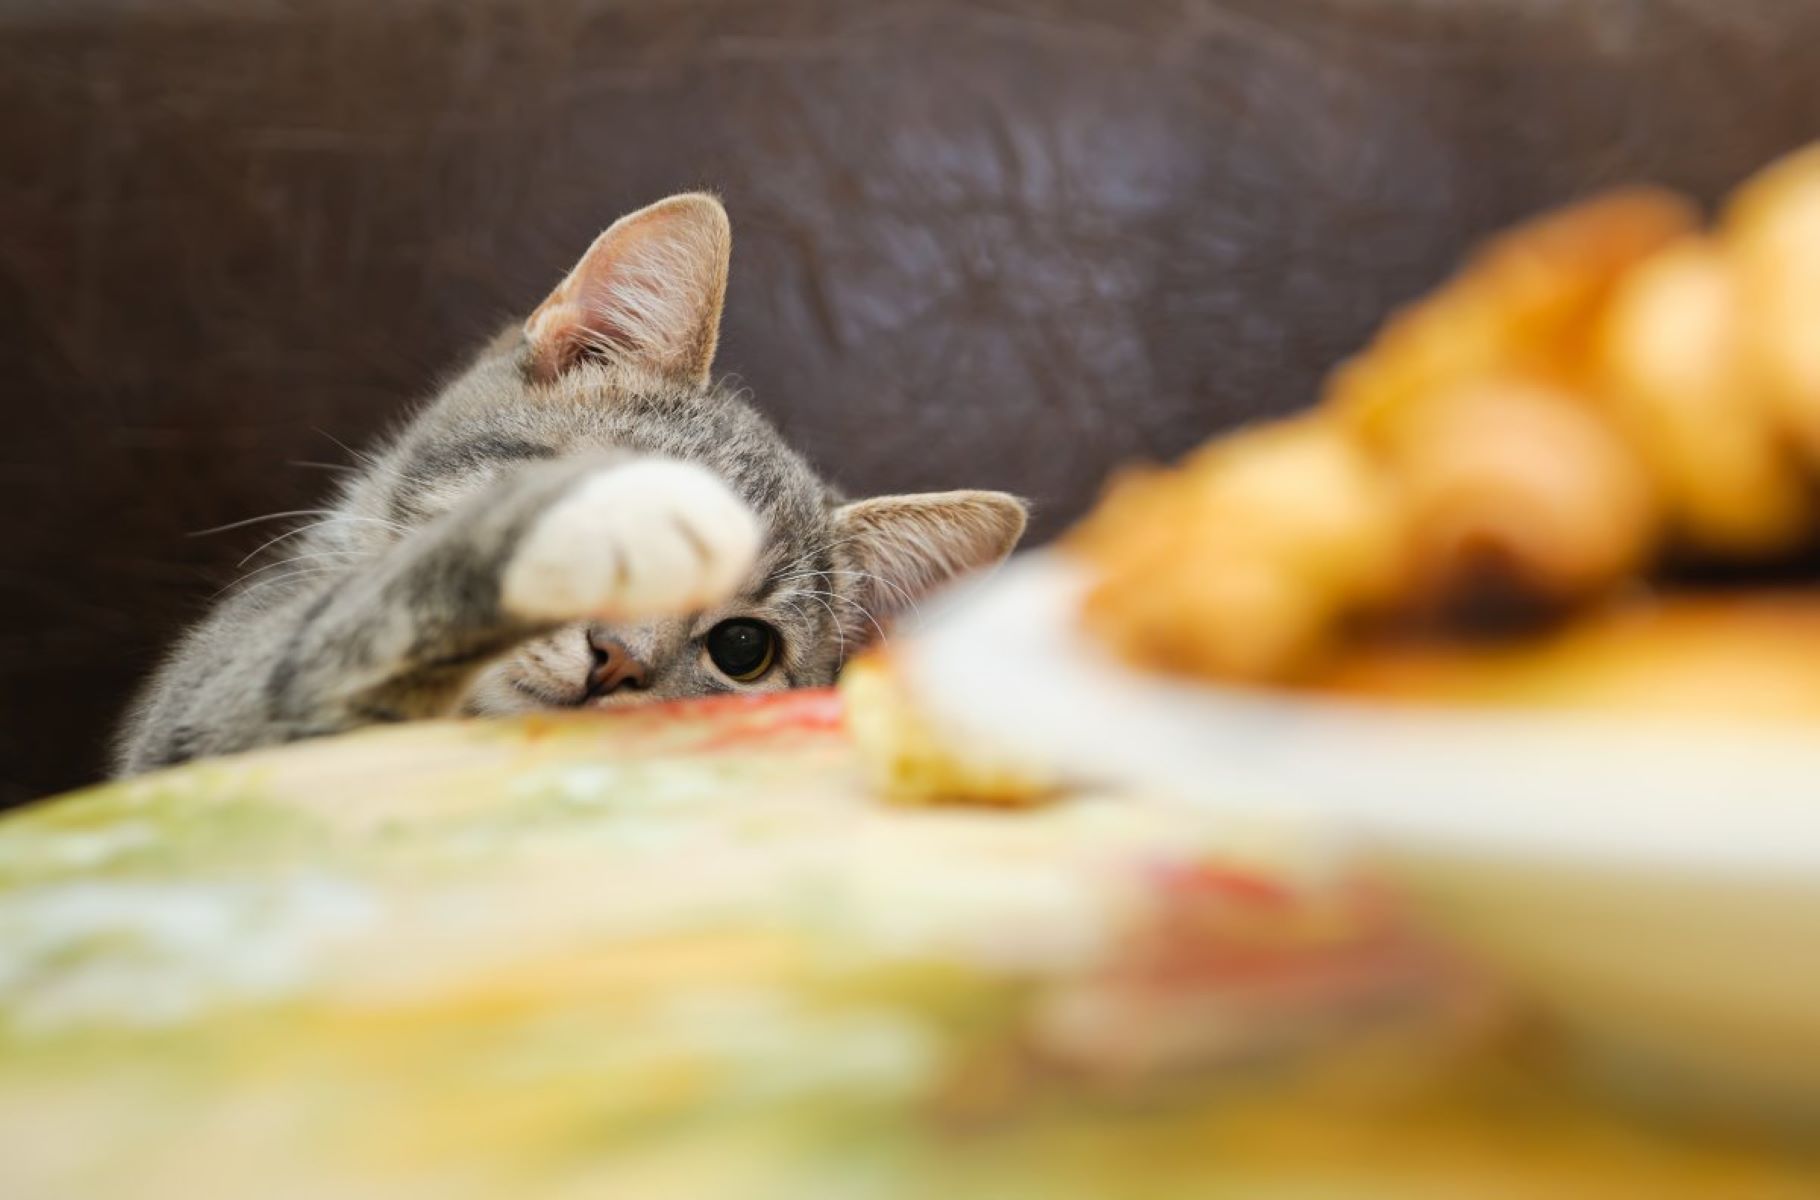 The Secret Behind Cats' Muffin-Making Obsession Revealed!